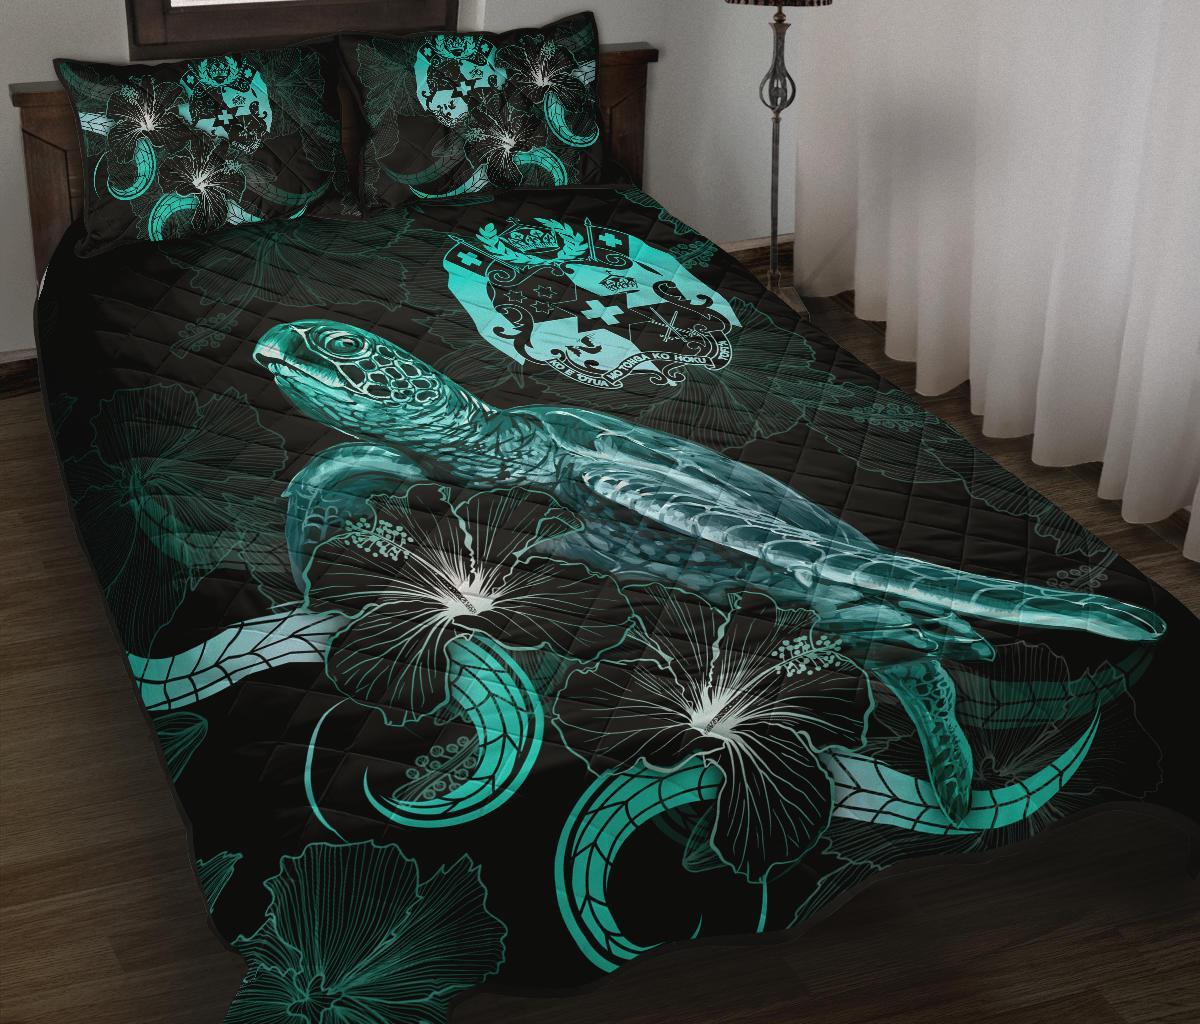 Tonga Polynesian Quilt Bed Set - Turtle With Blooming Hibiscus Turquoise Turquoise - Polynesian Pride